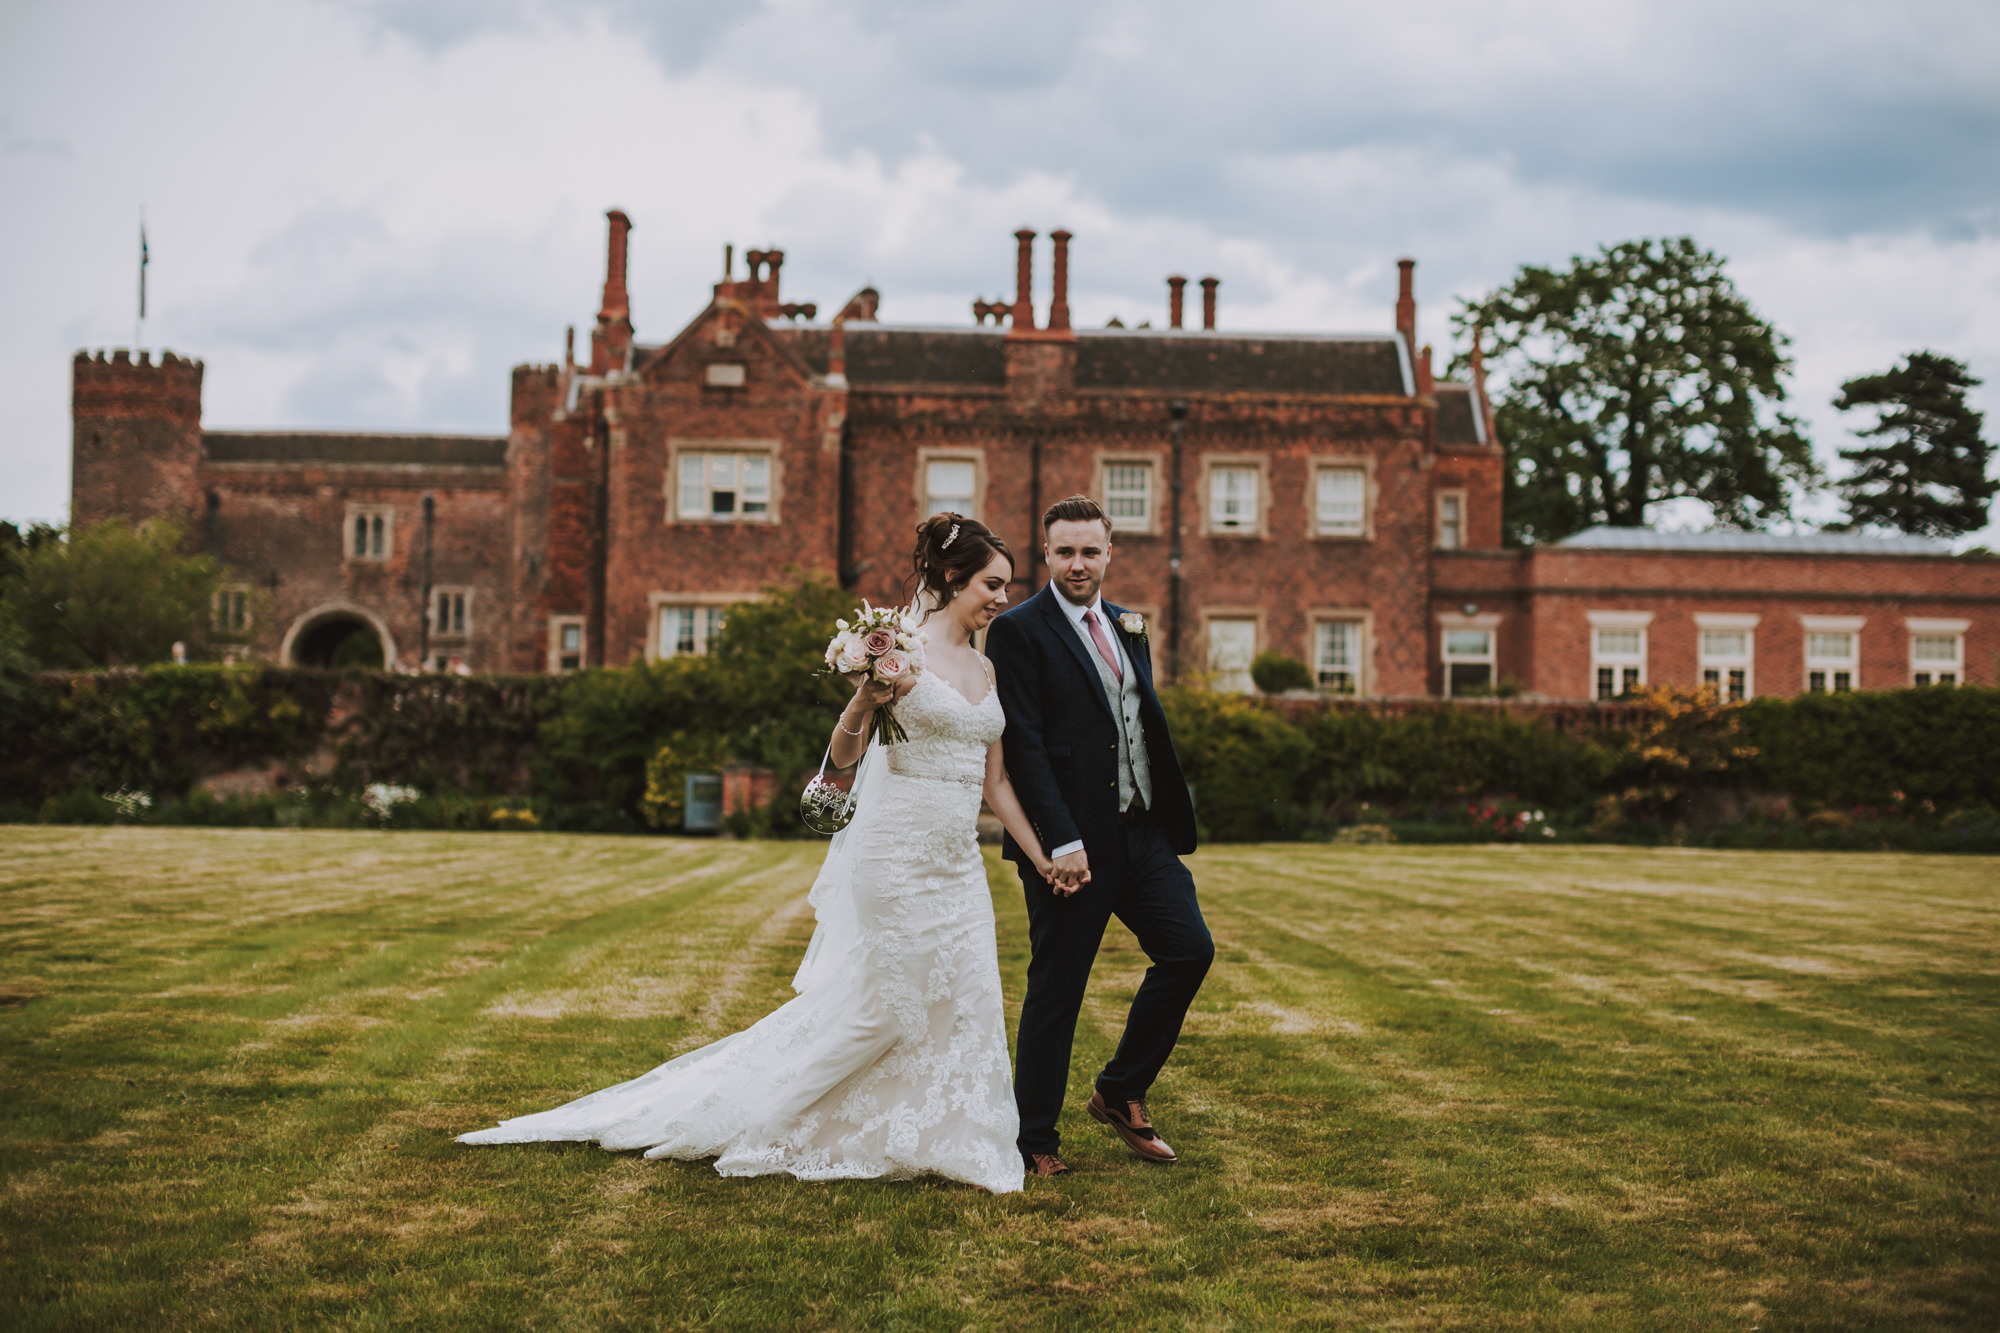 The best wedding photographer in Yorkshire